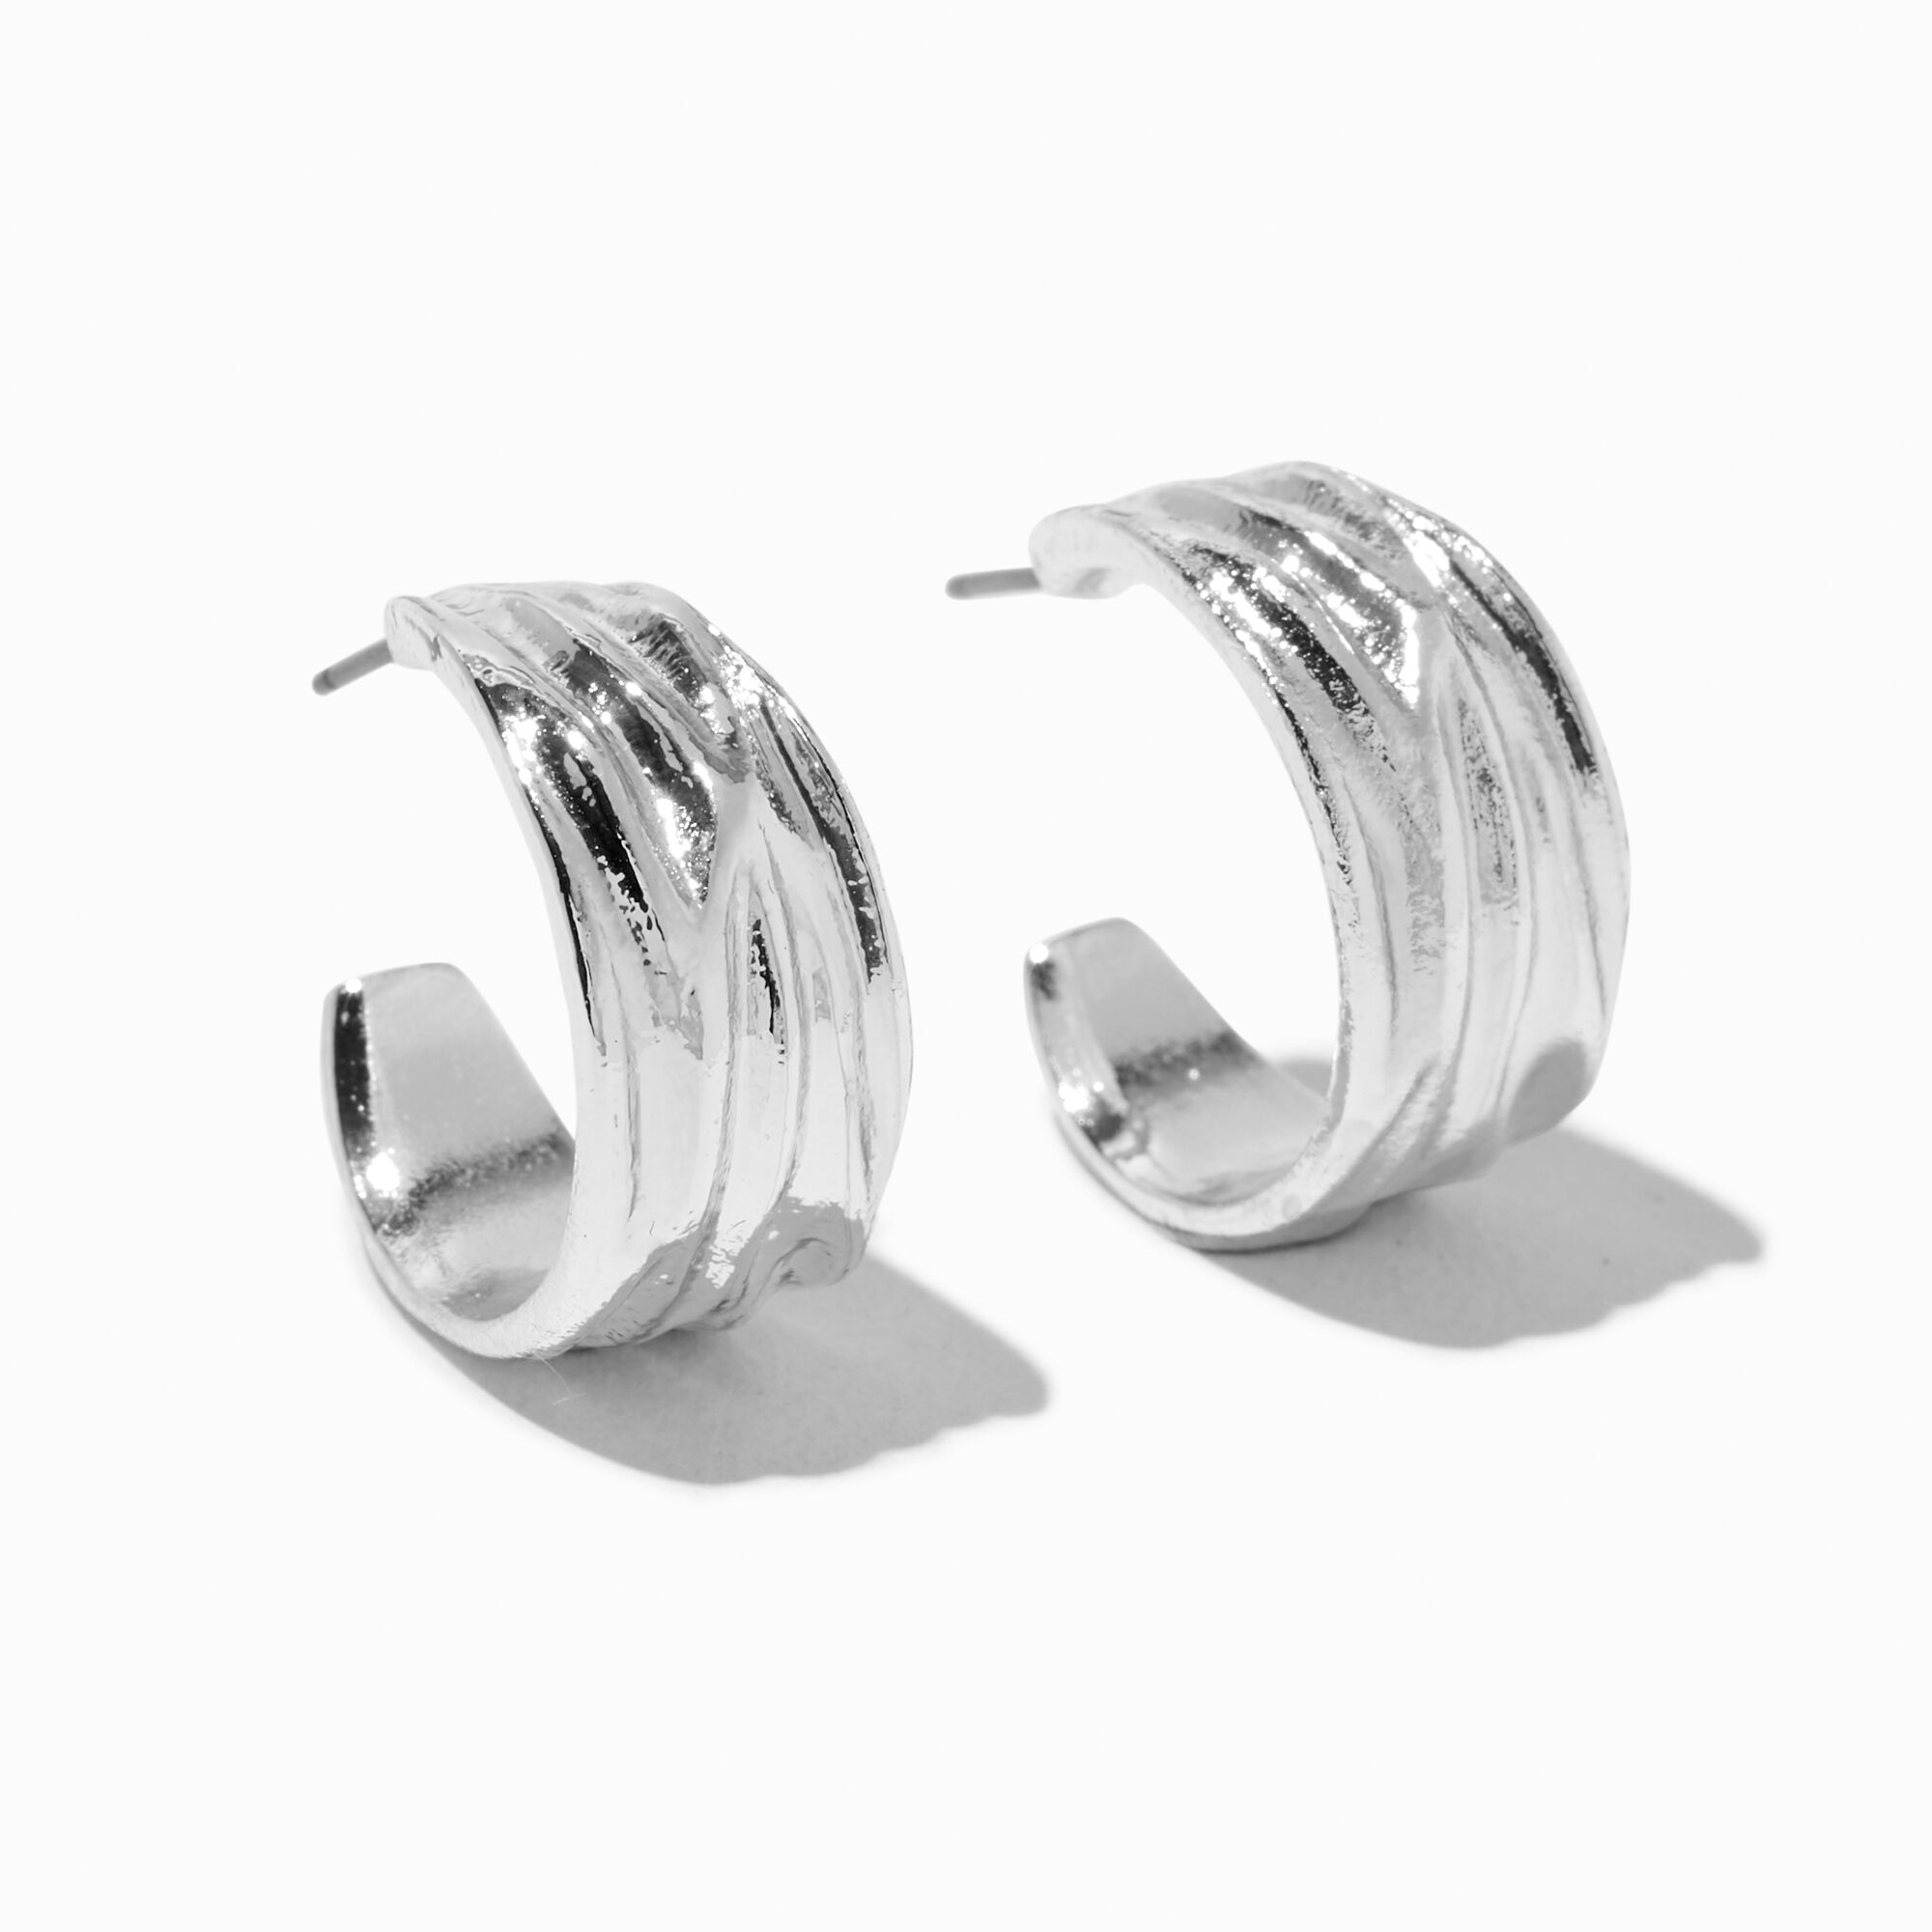 View Claires Tone 20MM Wide Textured Hoop Earrings Silver information